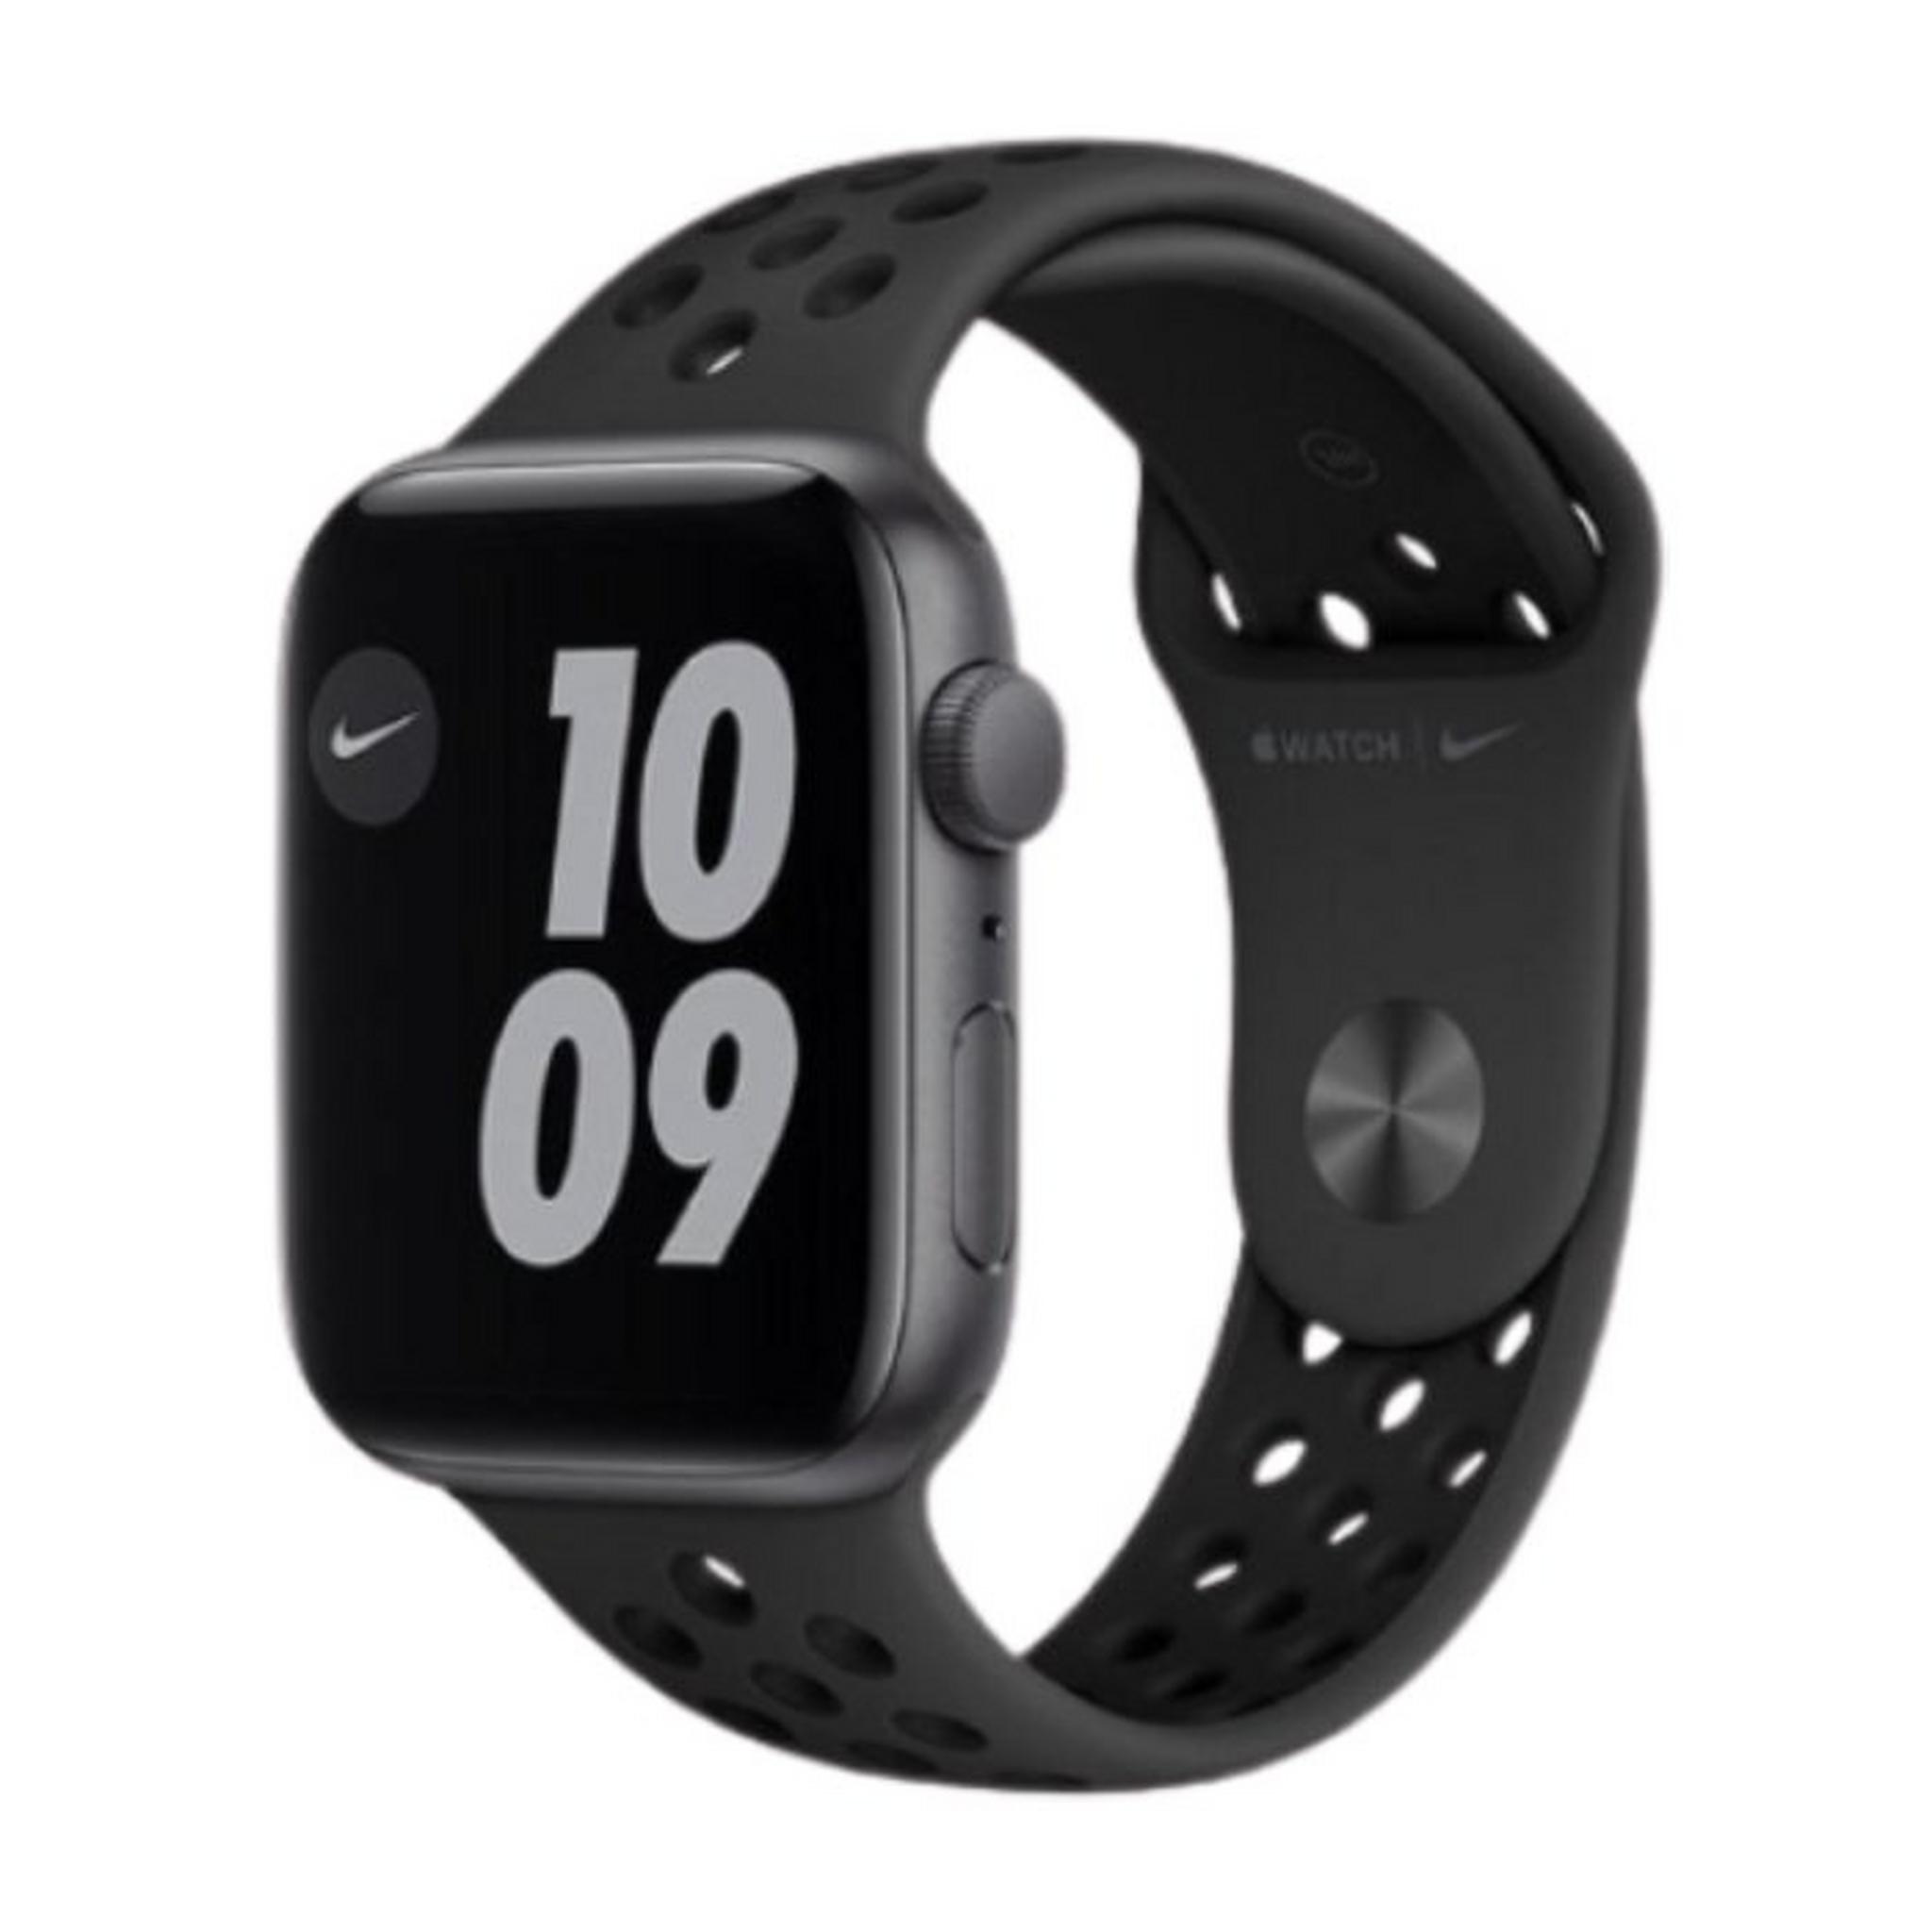 Apple Watch Nike Series 6 GPS 44mm Alminum Case Smart Watch - Space Gray / Anthracite Black